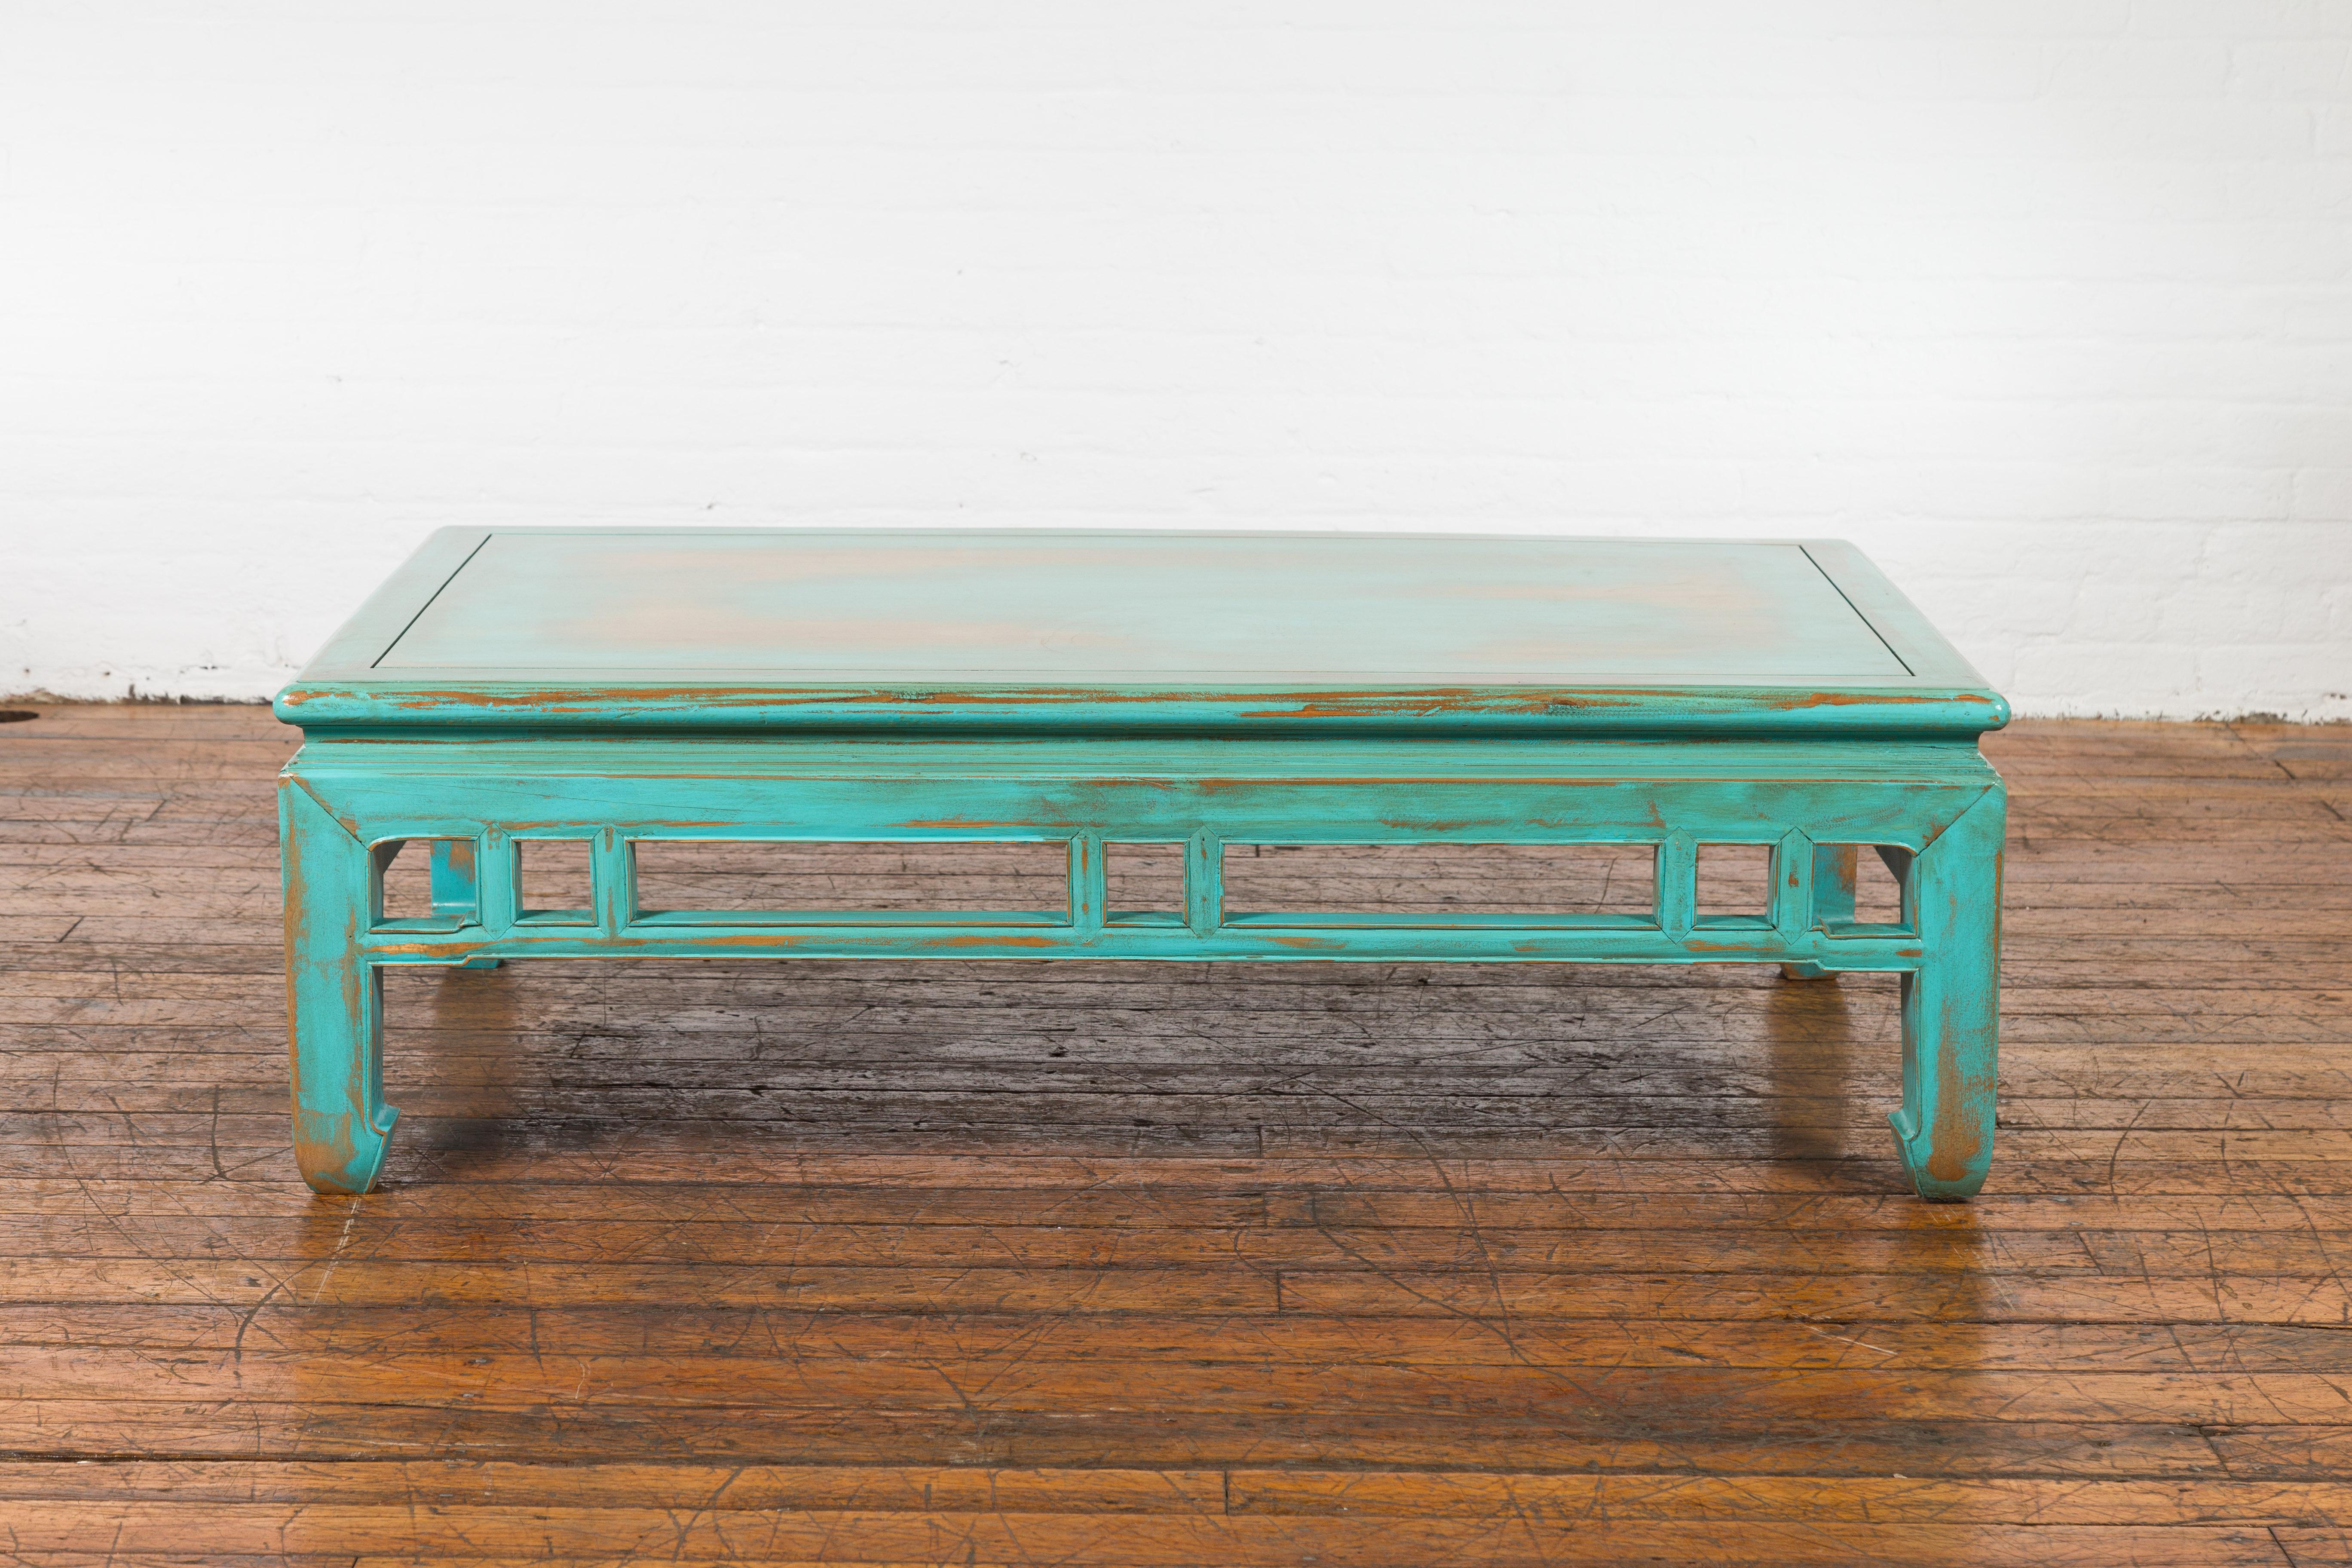 19th Century Chinese Qing Dynasty Low Kang Coffee Table with Custom Aqua Teal Lacquer For Sale